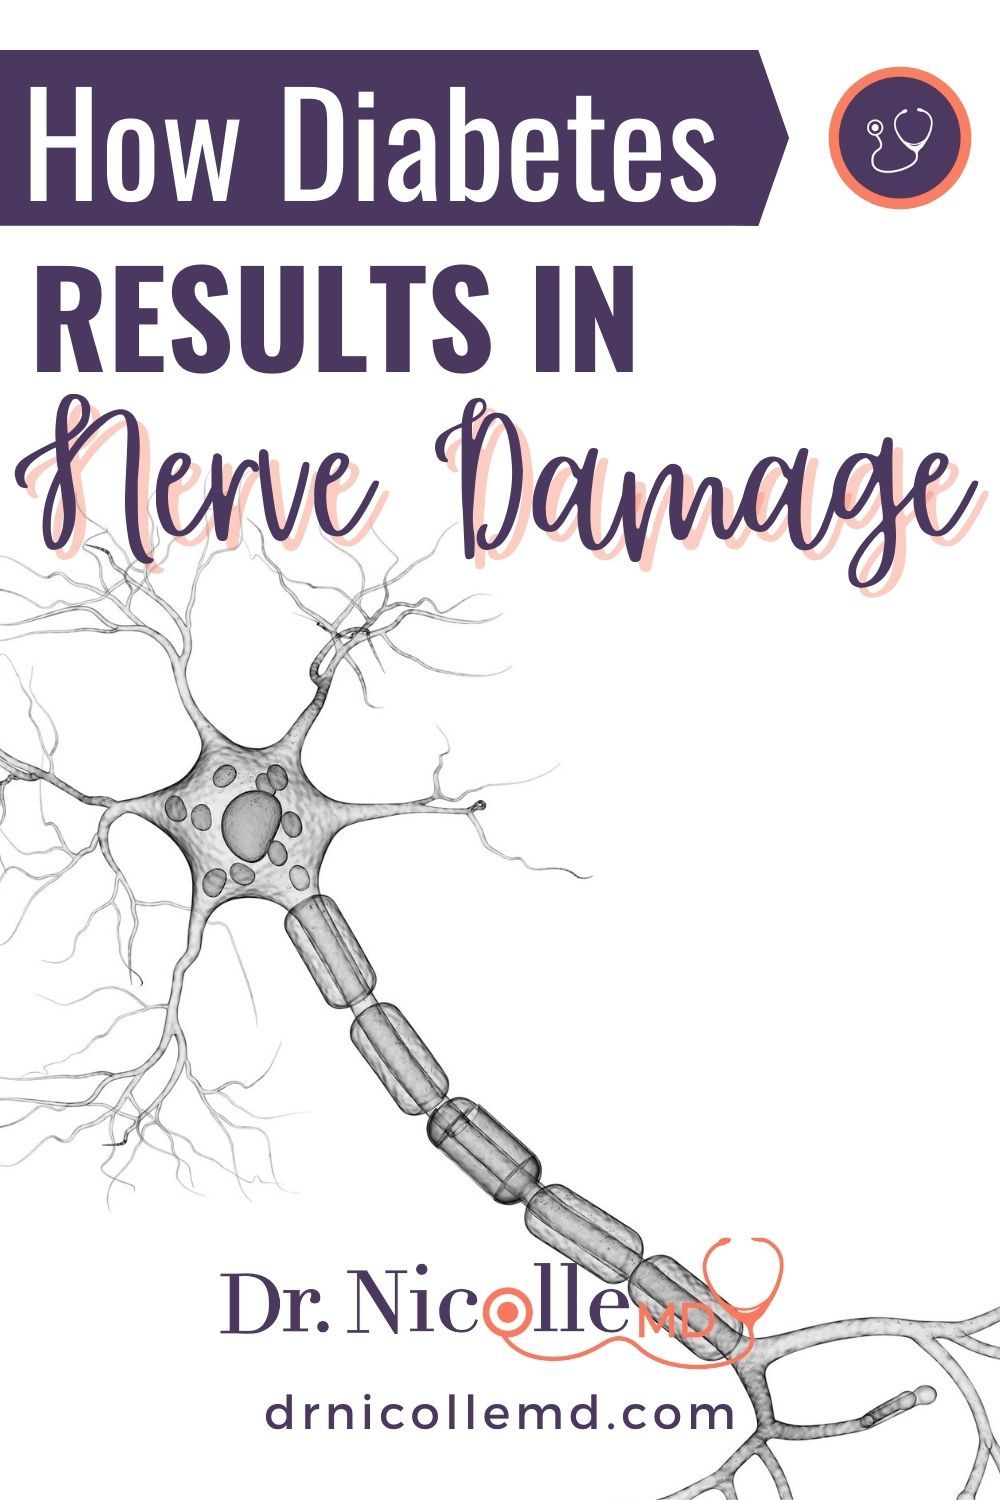 How Diabetes Results in Nerve Damage